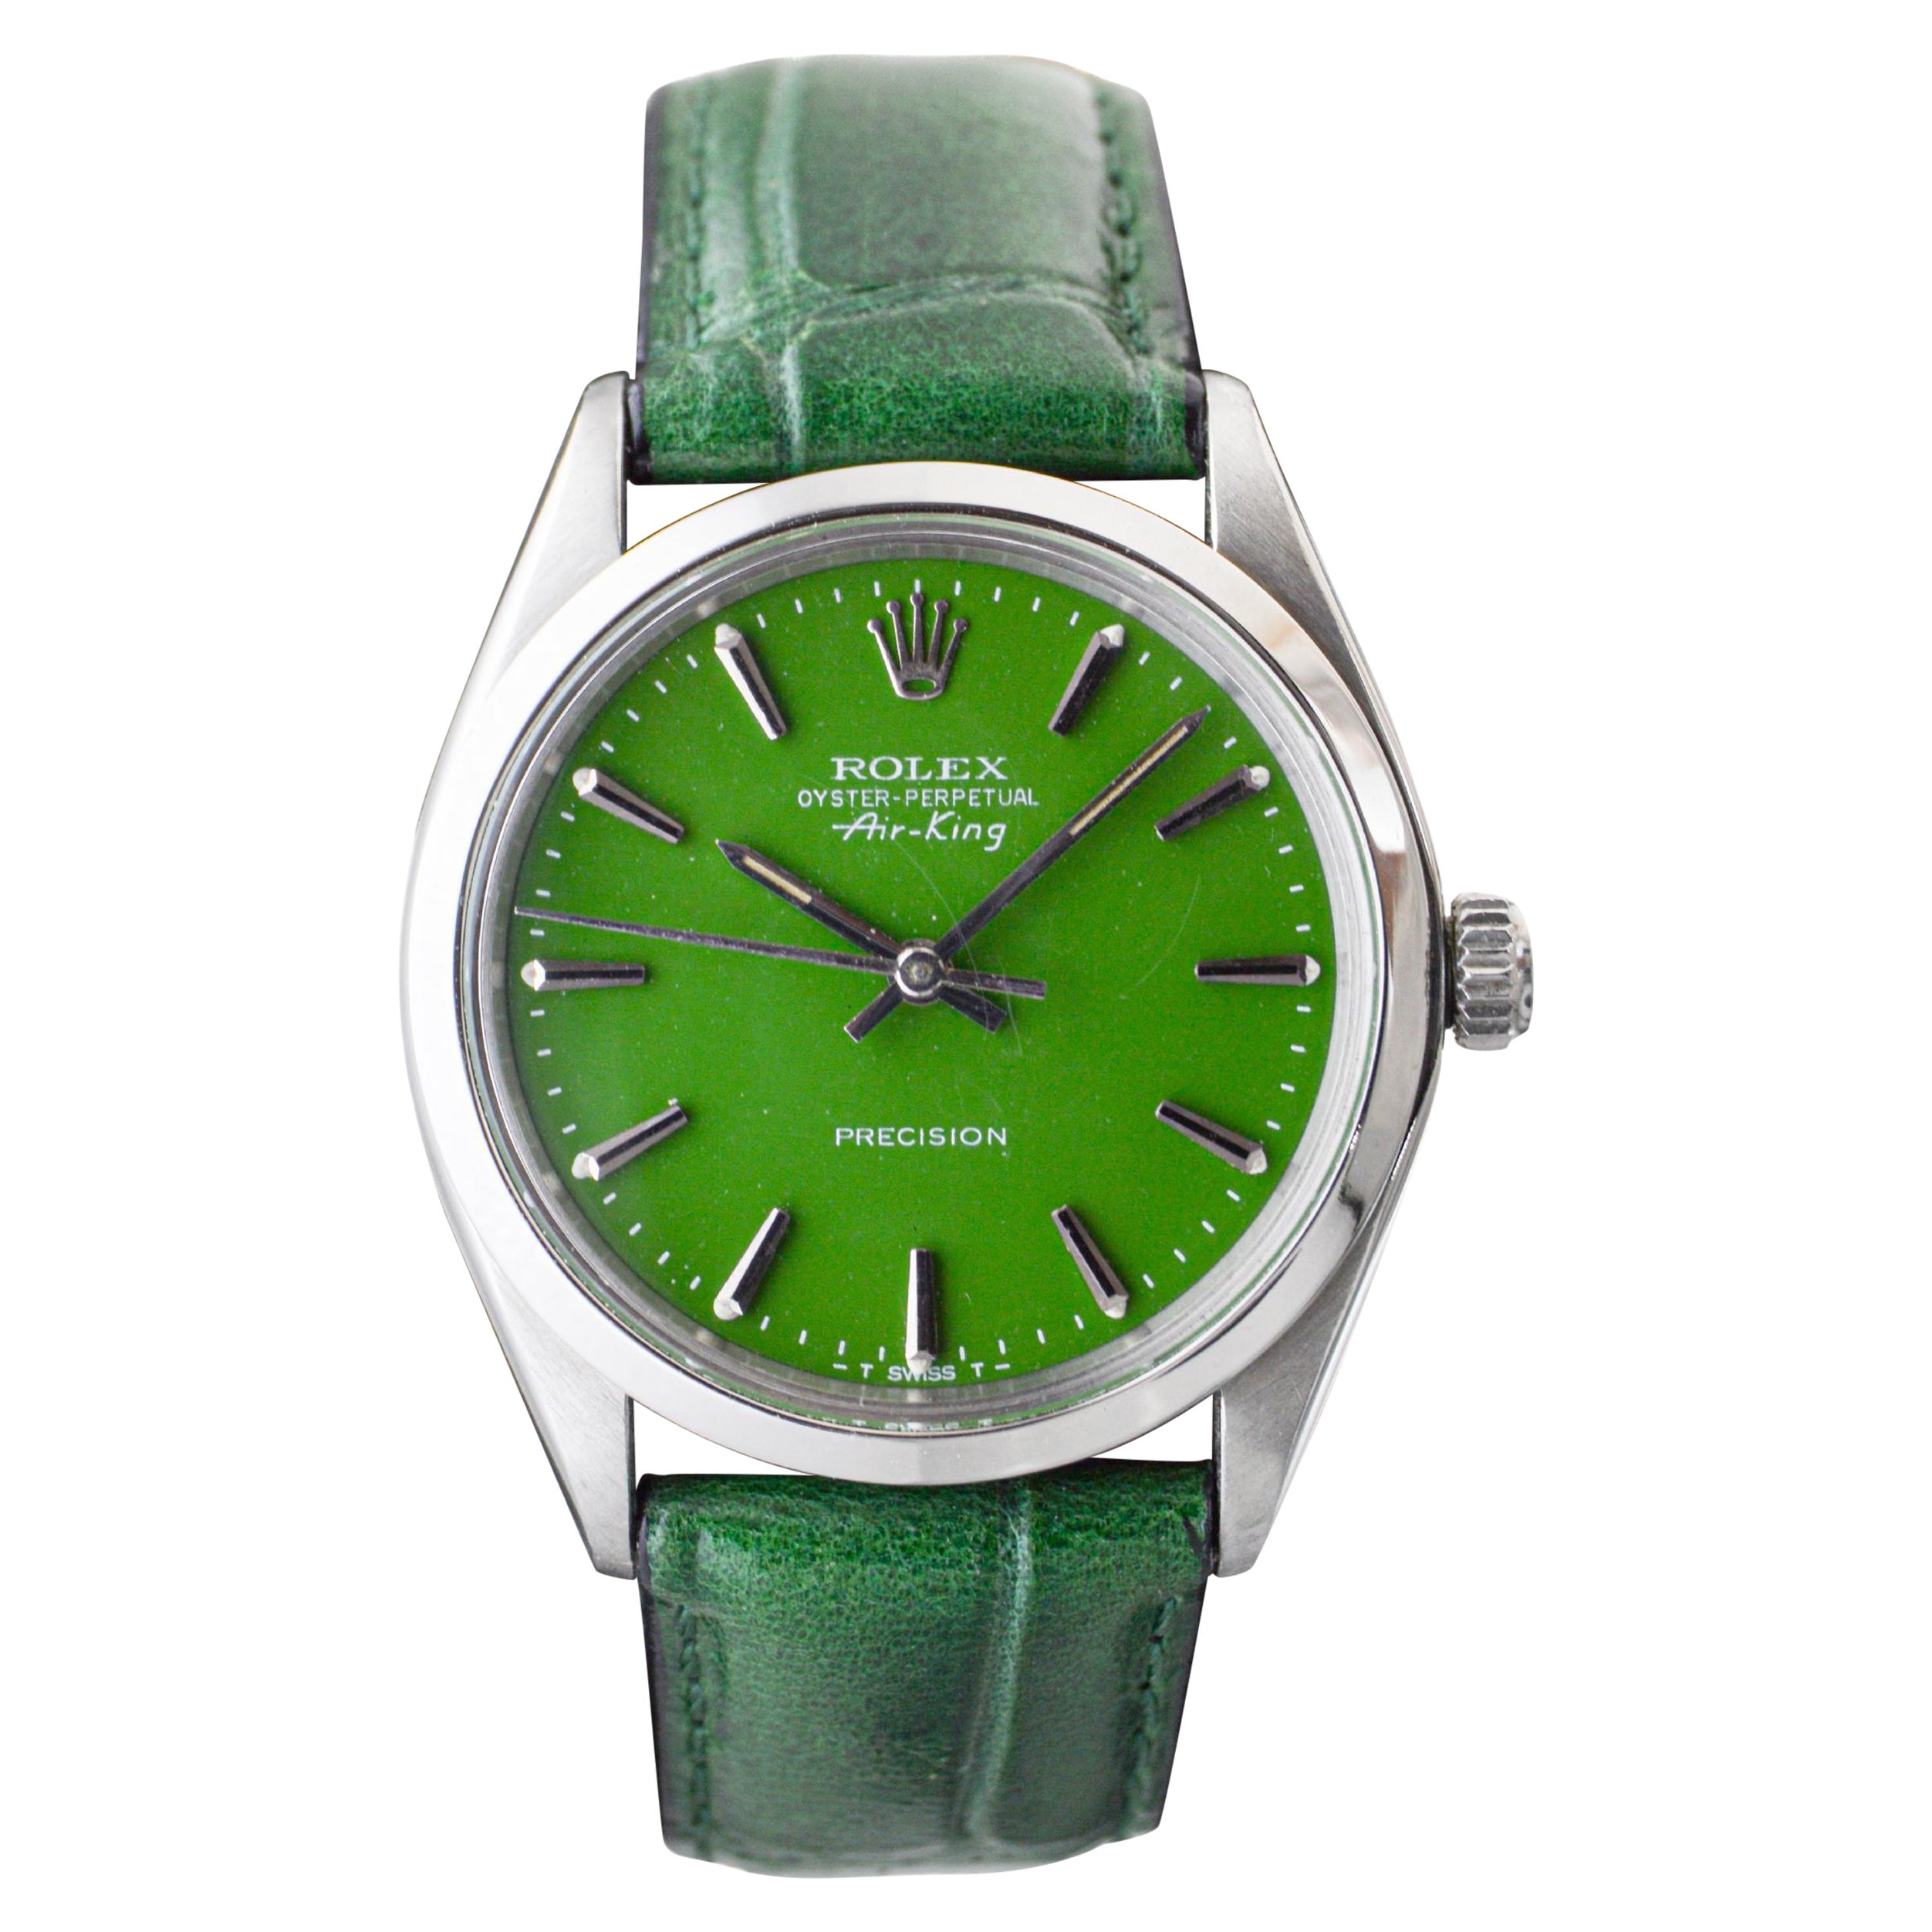 Rolex Steel Oyster Perpetual Air King with Custom Finished Green Dial, 1970's For Sale